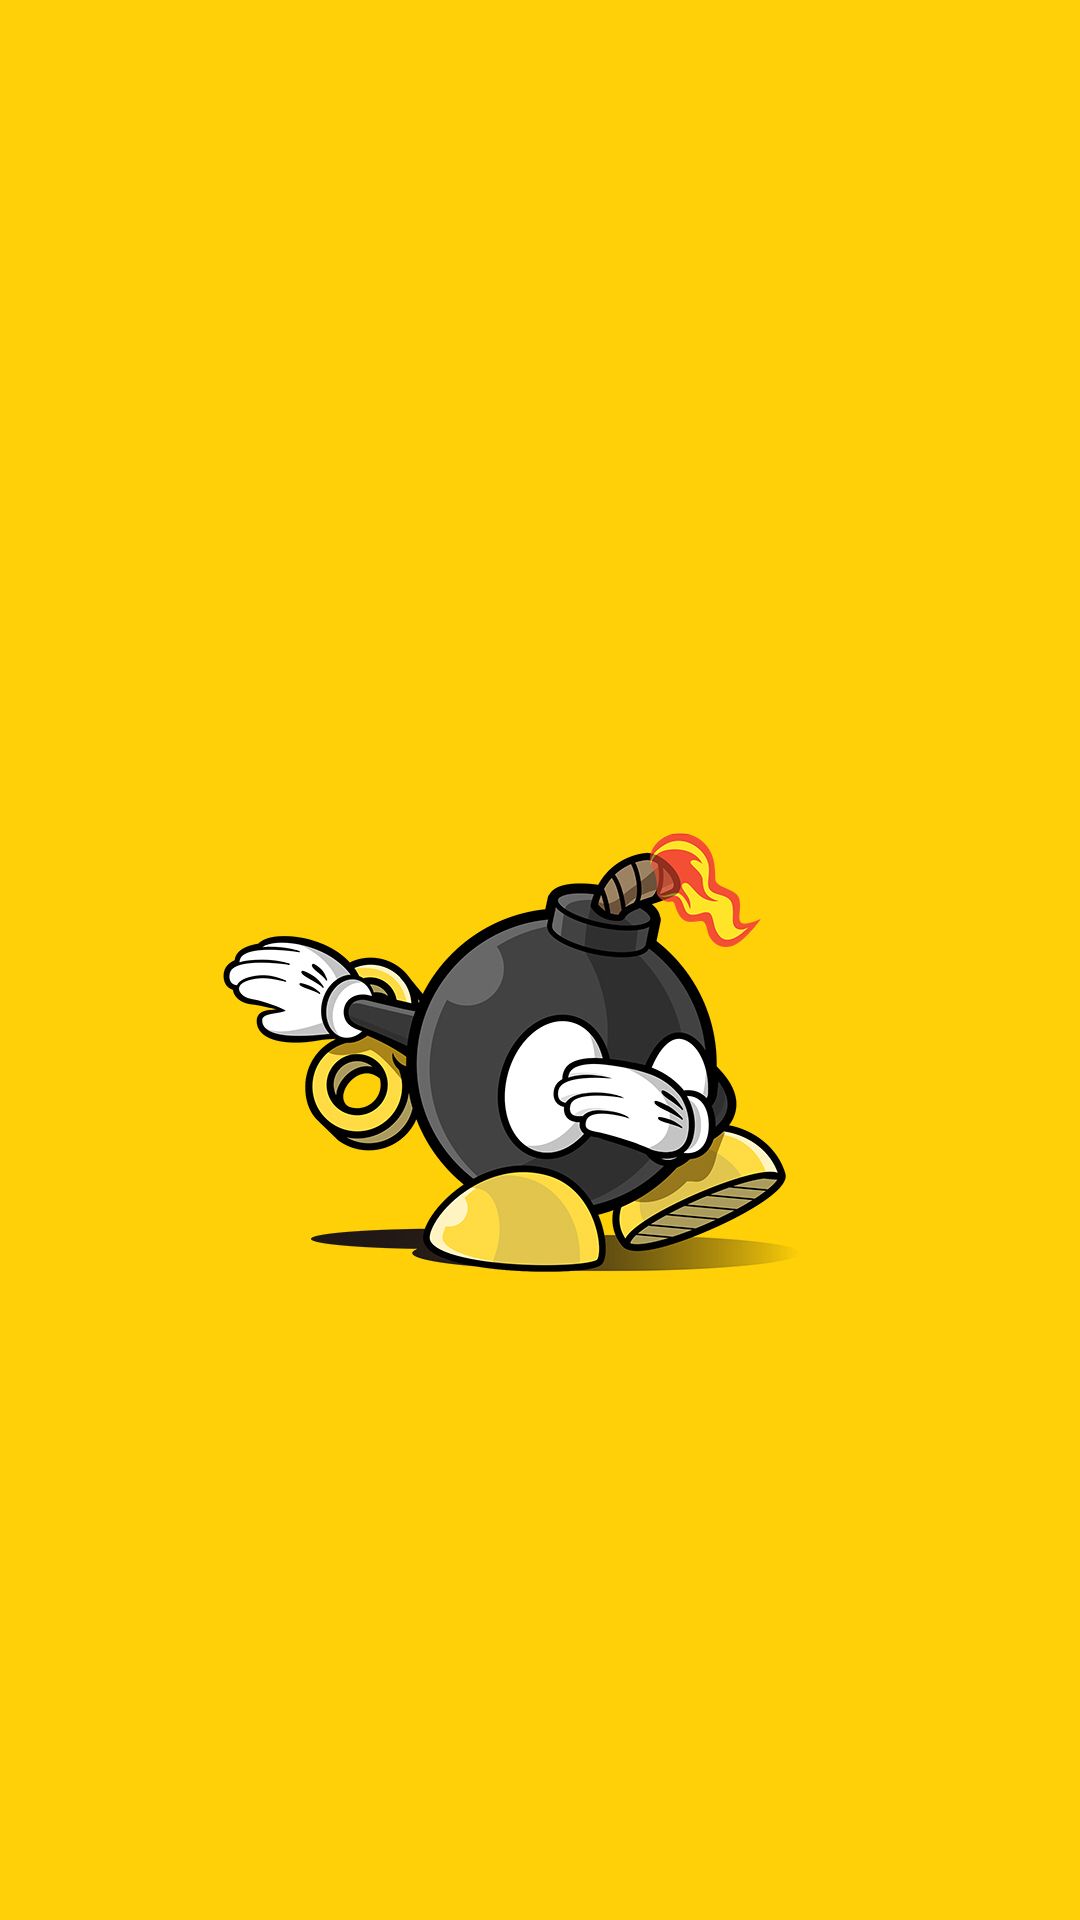 General 1080x1920 Bomb City dab Bob-omb simple background yellow yellow background video game characters